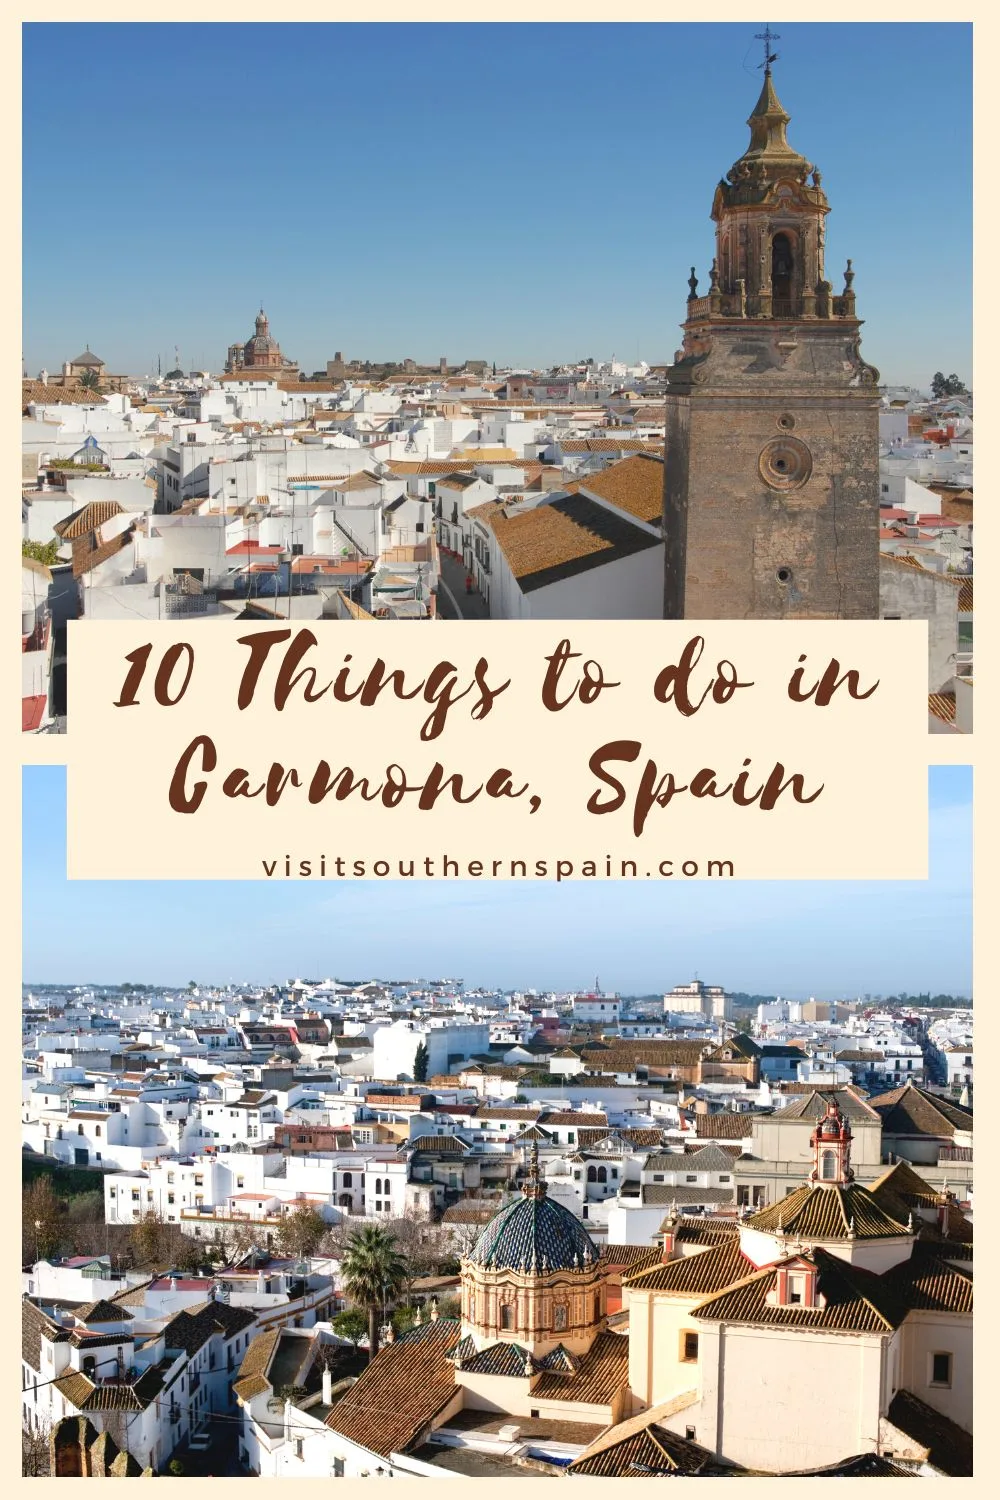 things to do in carmona 3 - 10 Fun Things to do in Carmona, Seville